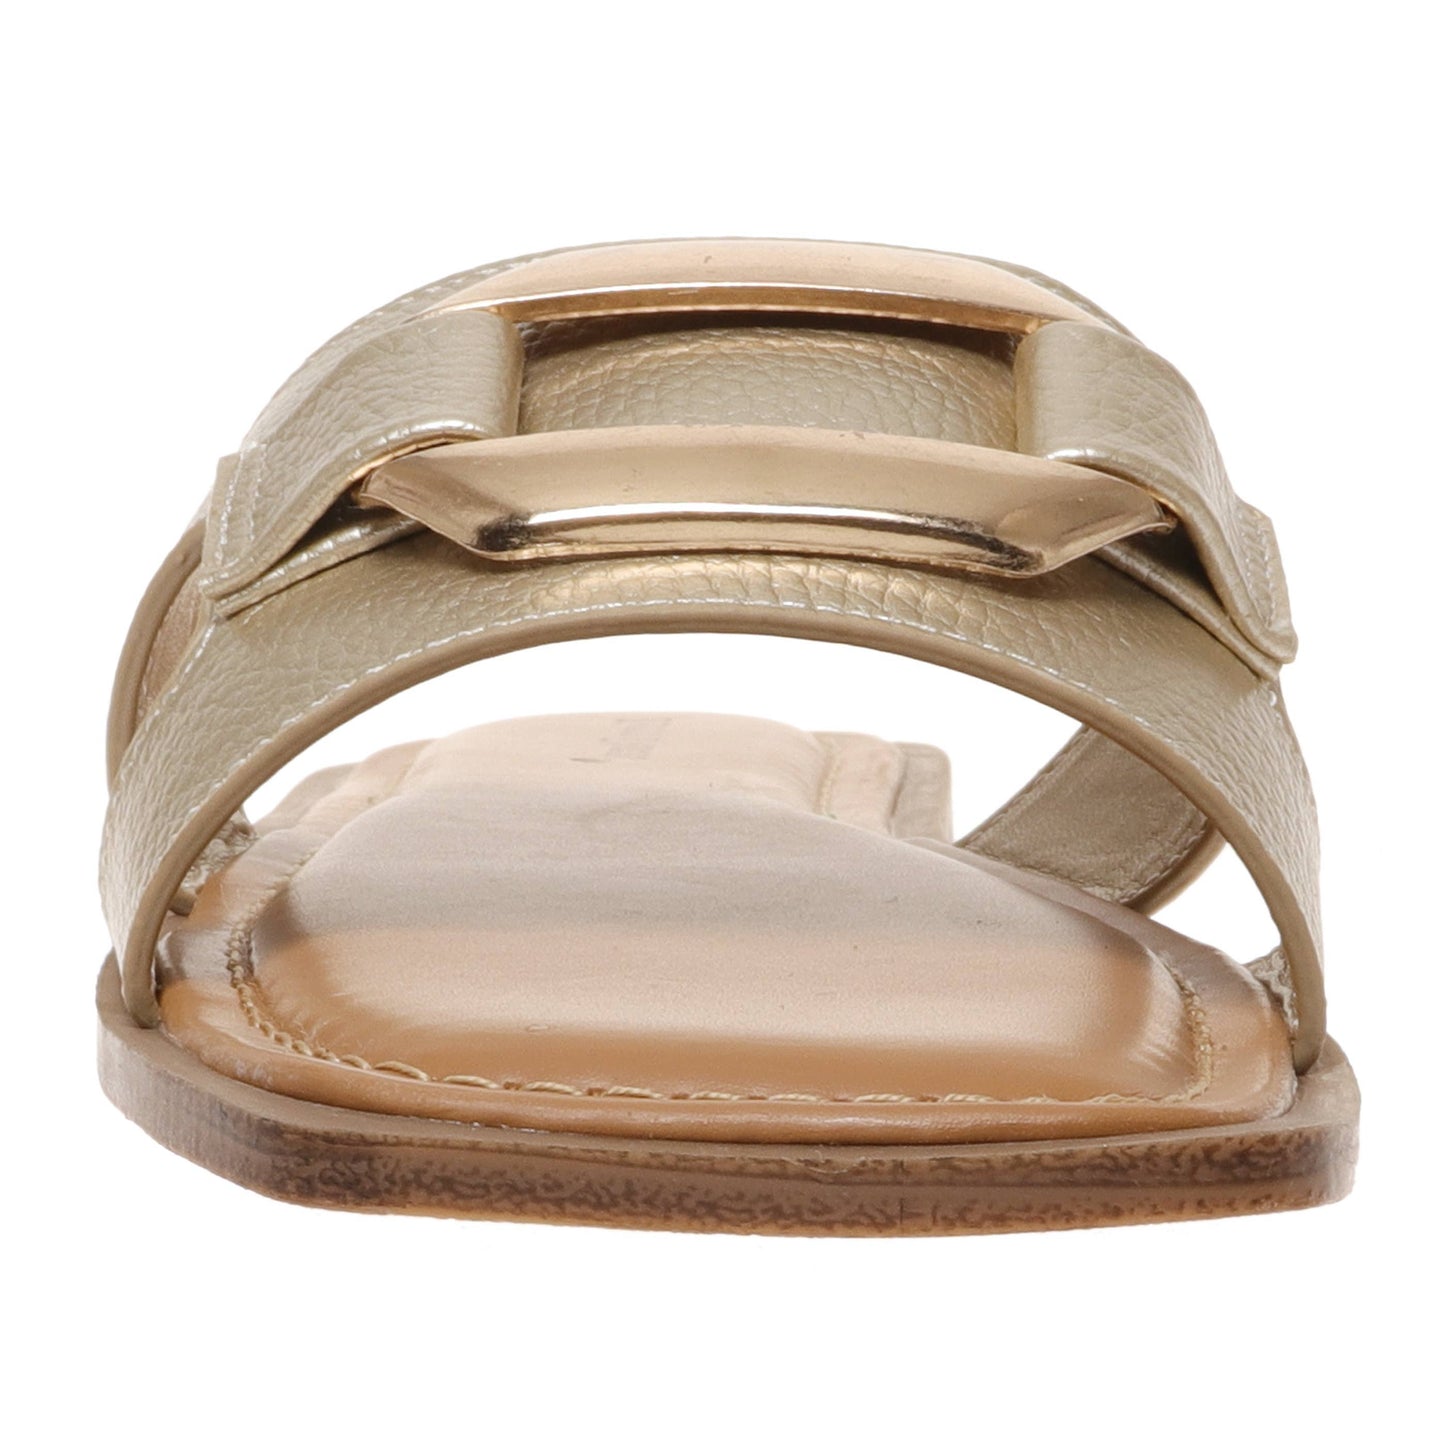 The Gold Buckle Slide